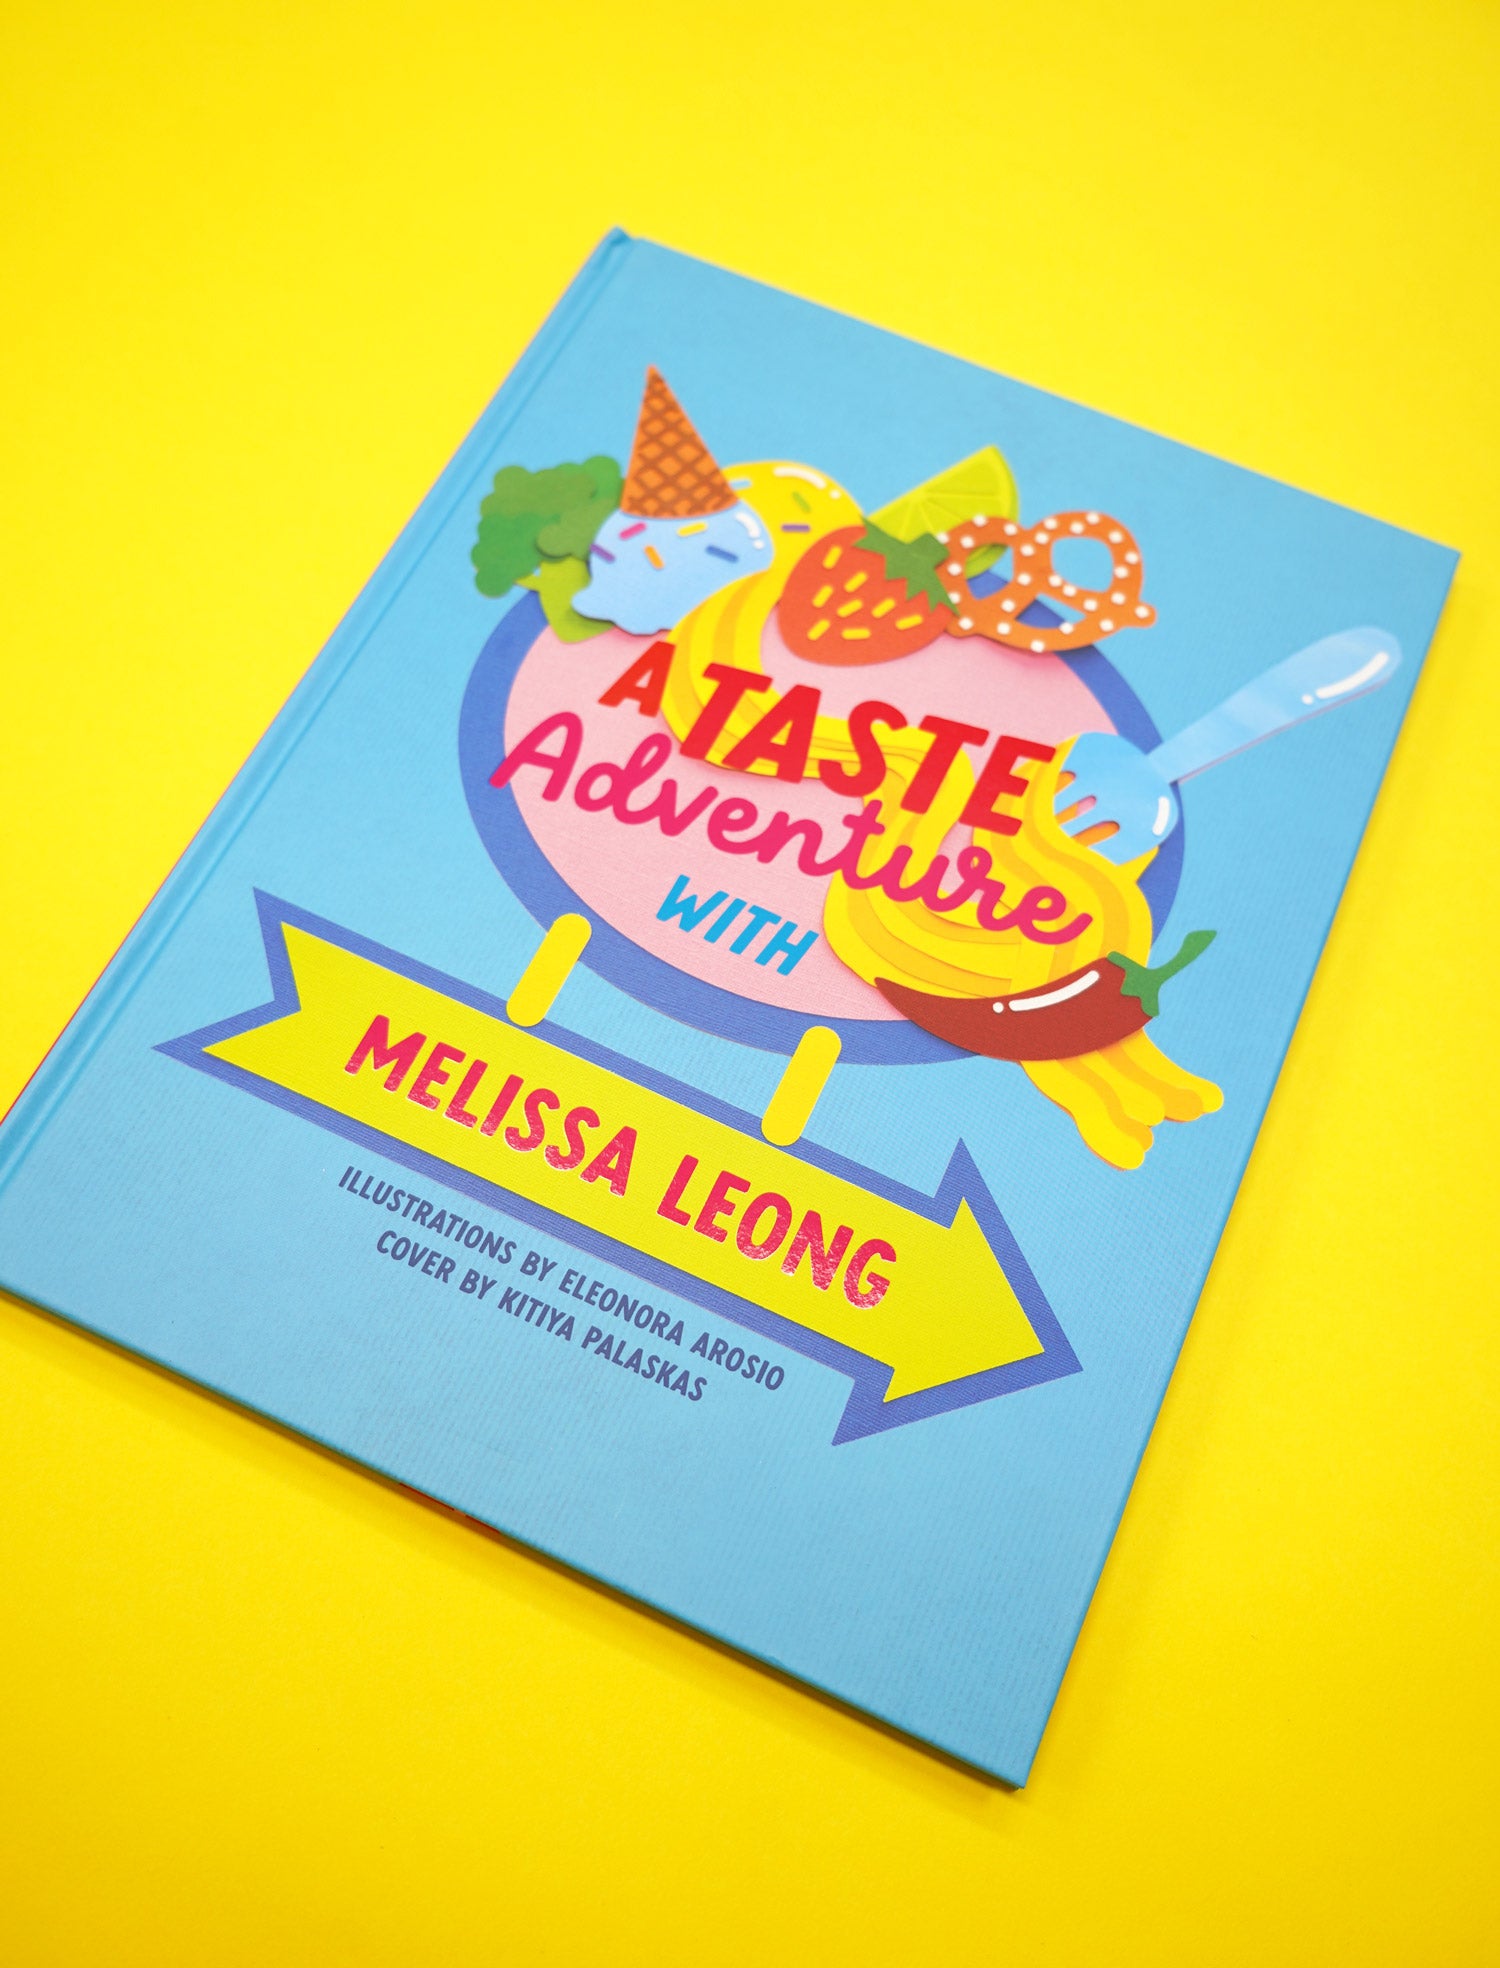 The book "A Taste Adventure" sits in a yellow background. The front cover features handmade craft based paper illustration of food by Kitiya Palaskas